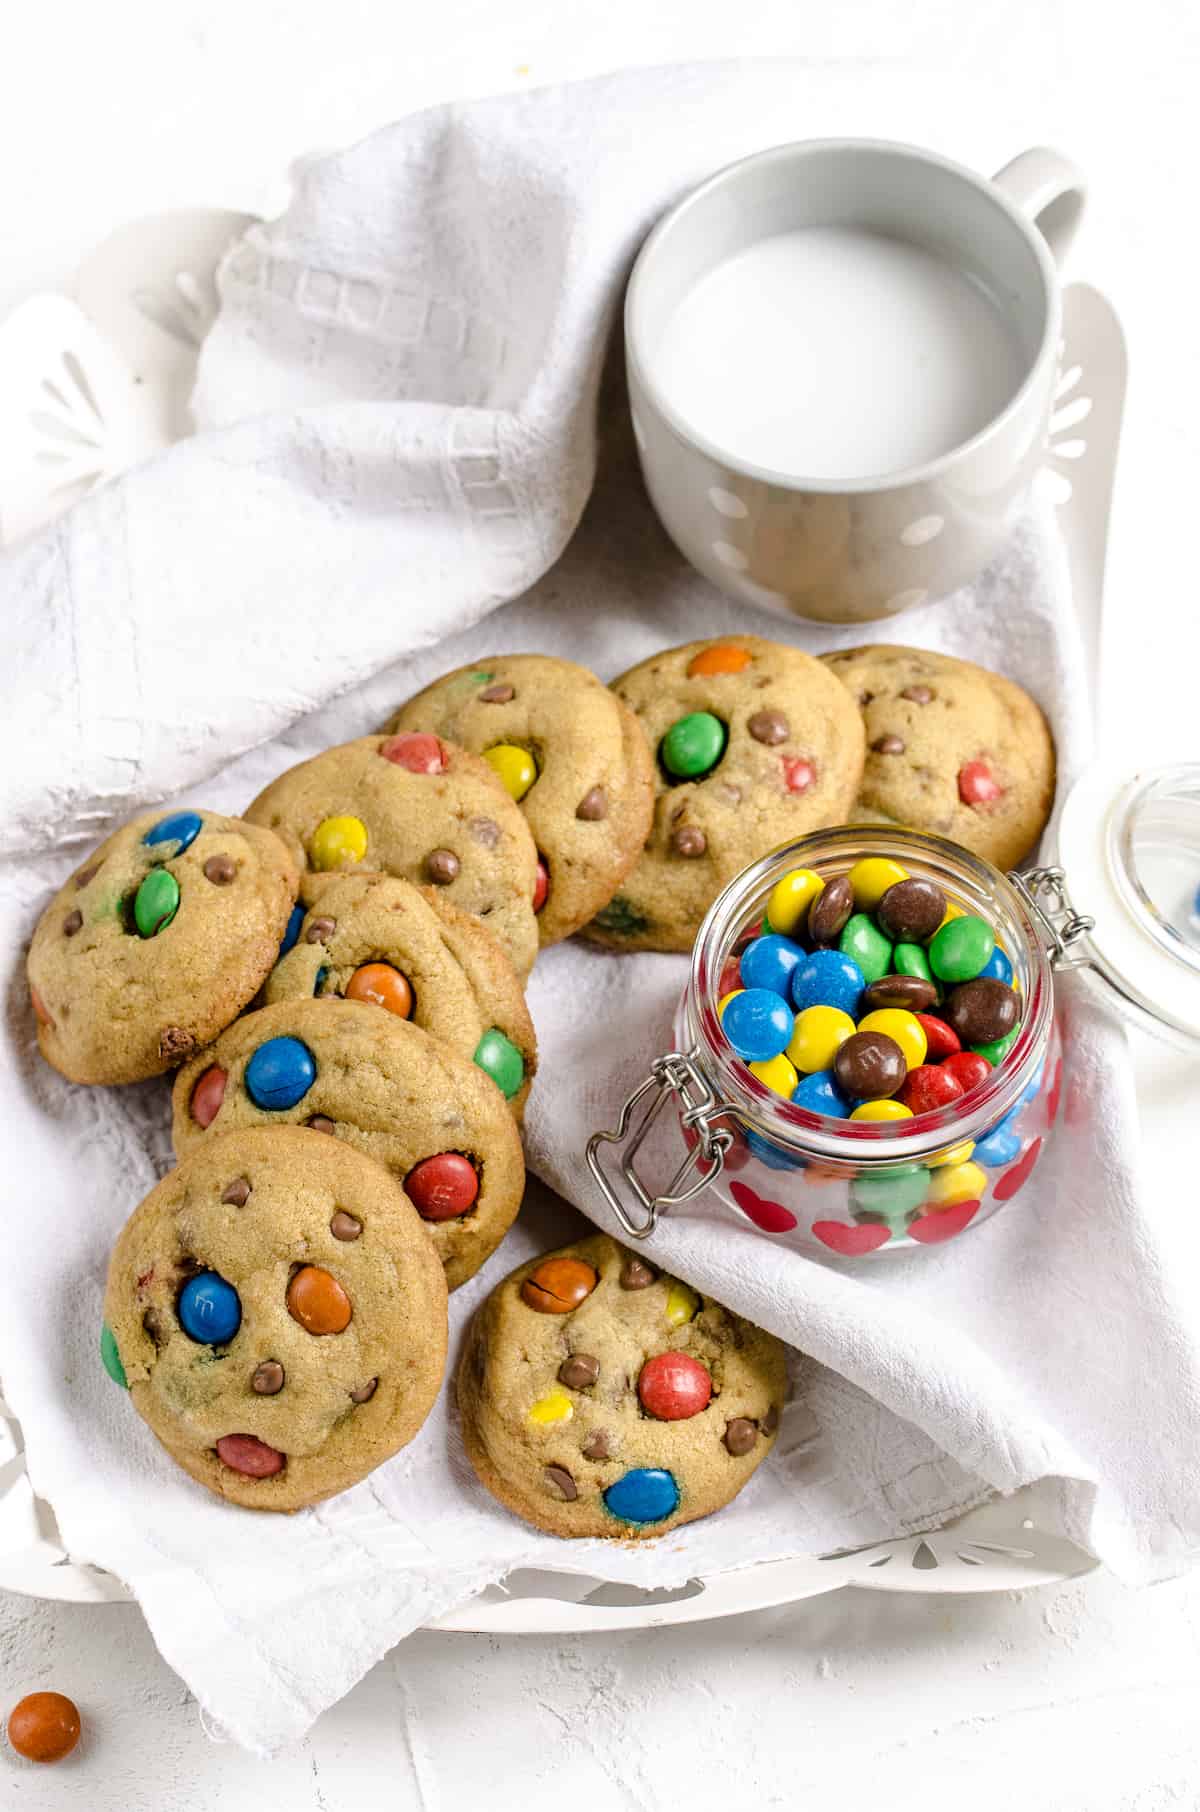 A serving platter holding homemade cookies, a jar of M&Ms and a glass of milk